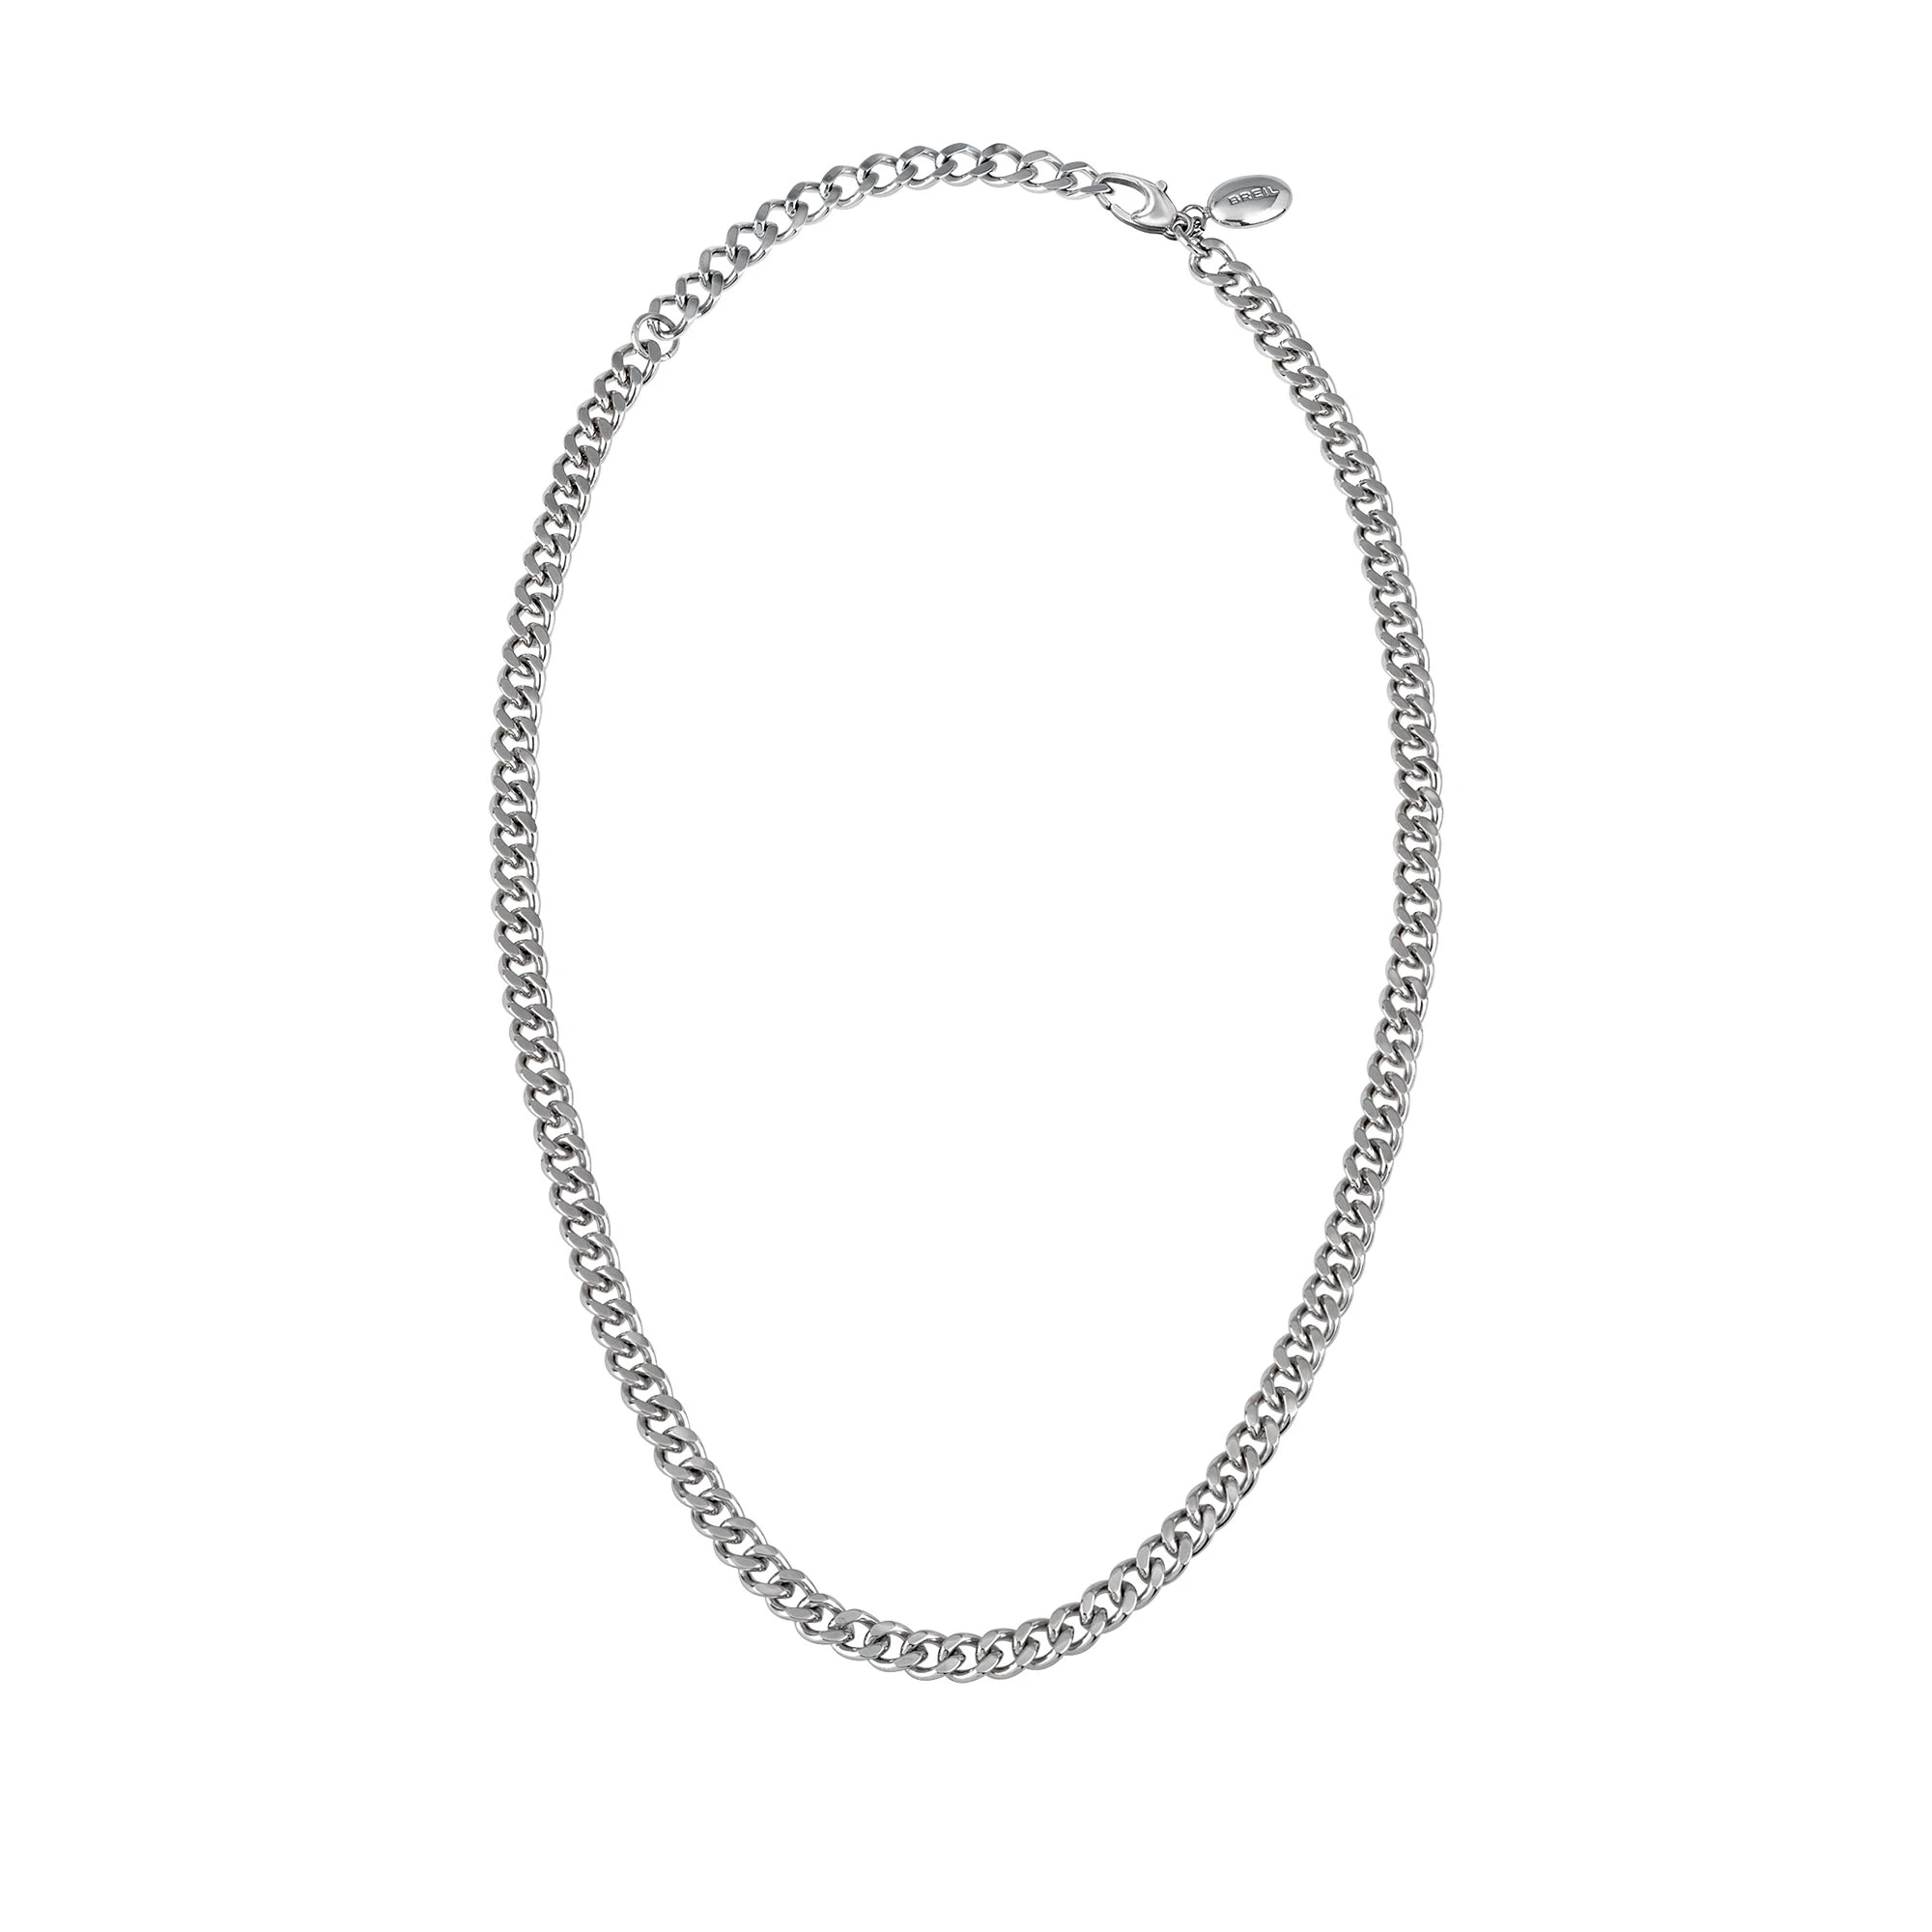 JOIN UP - POLISHED STEEL CHAIN NECKLACE - 1 - TJ2914 | Breil